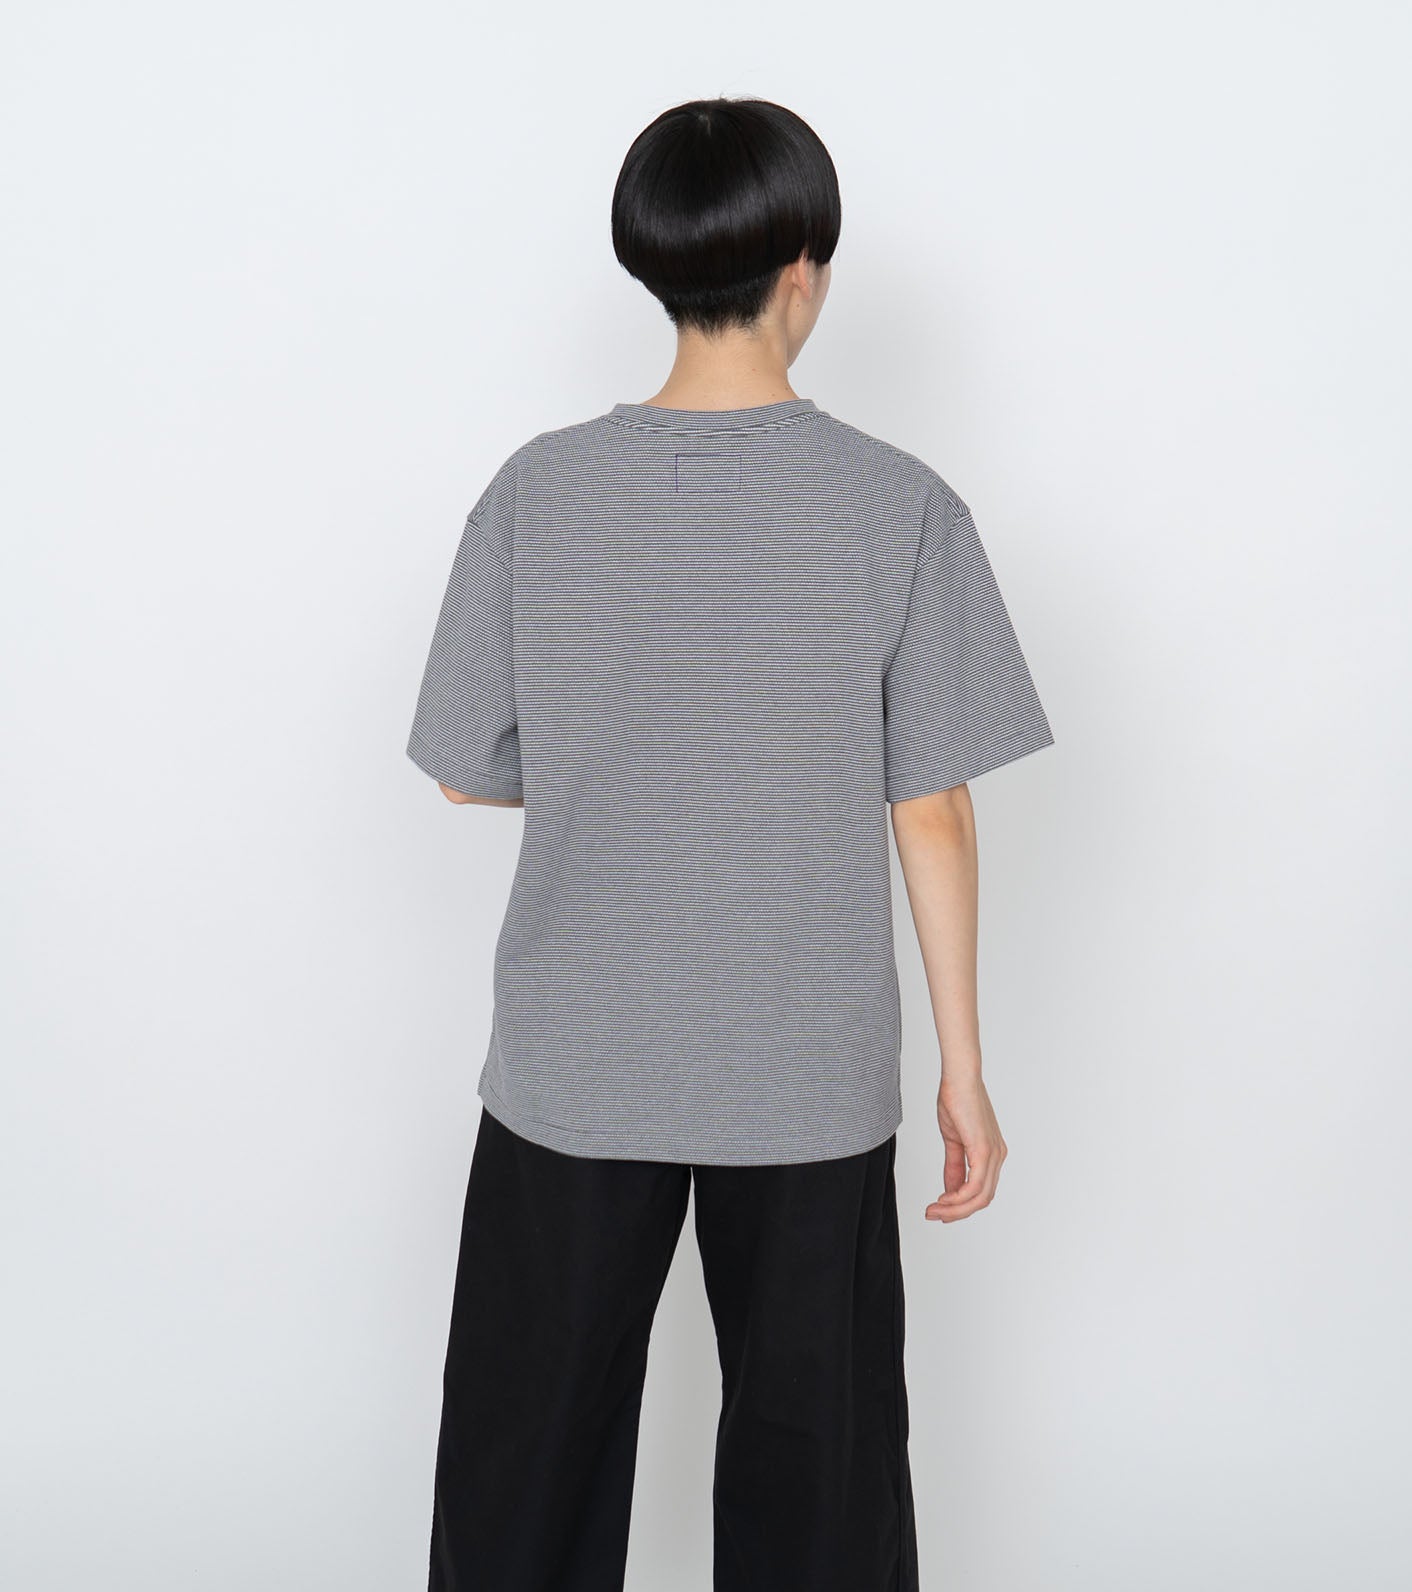 THE NORTH FACE PURPLE LABEL Moss Stitch Field H/S Tee